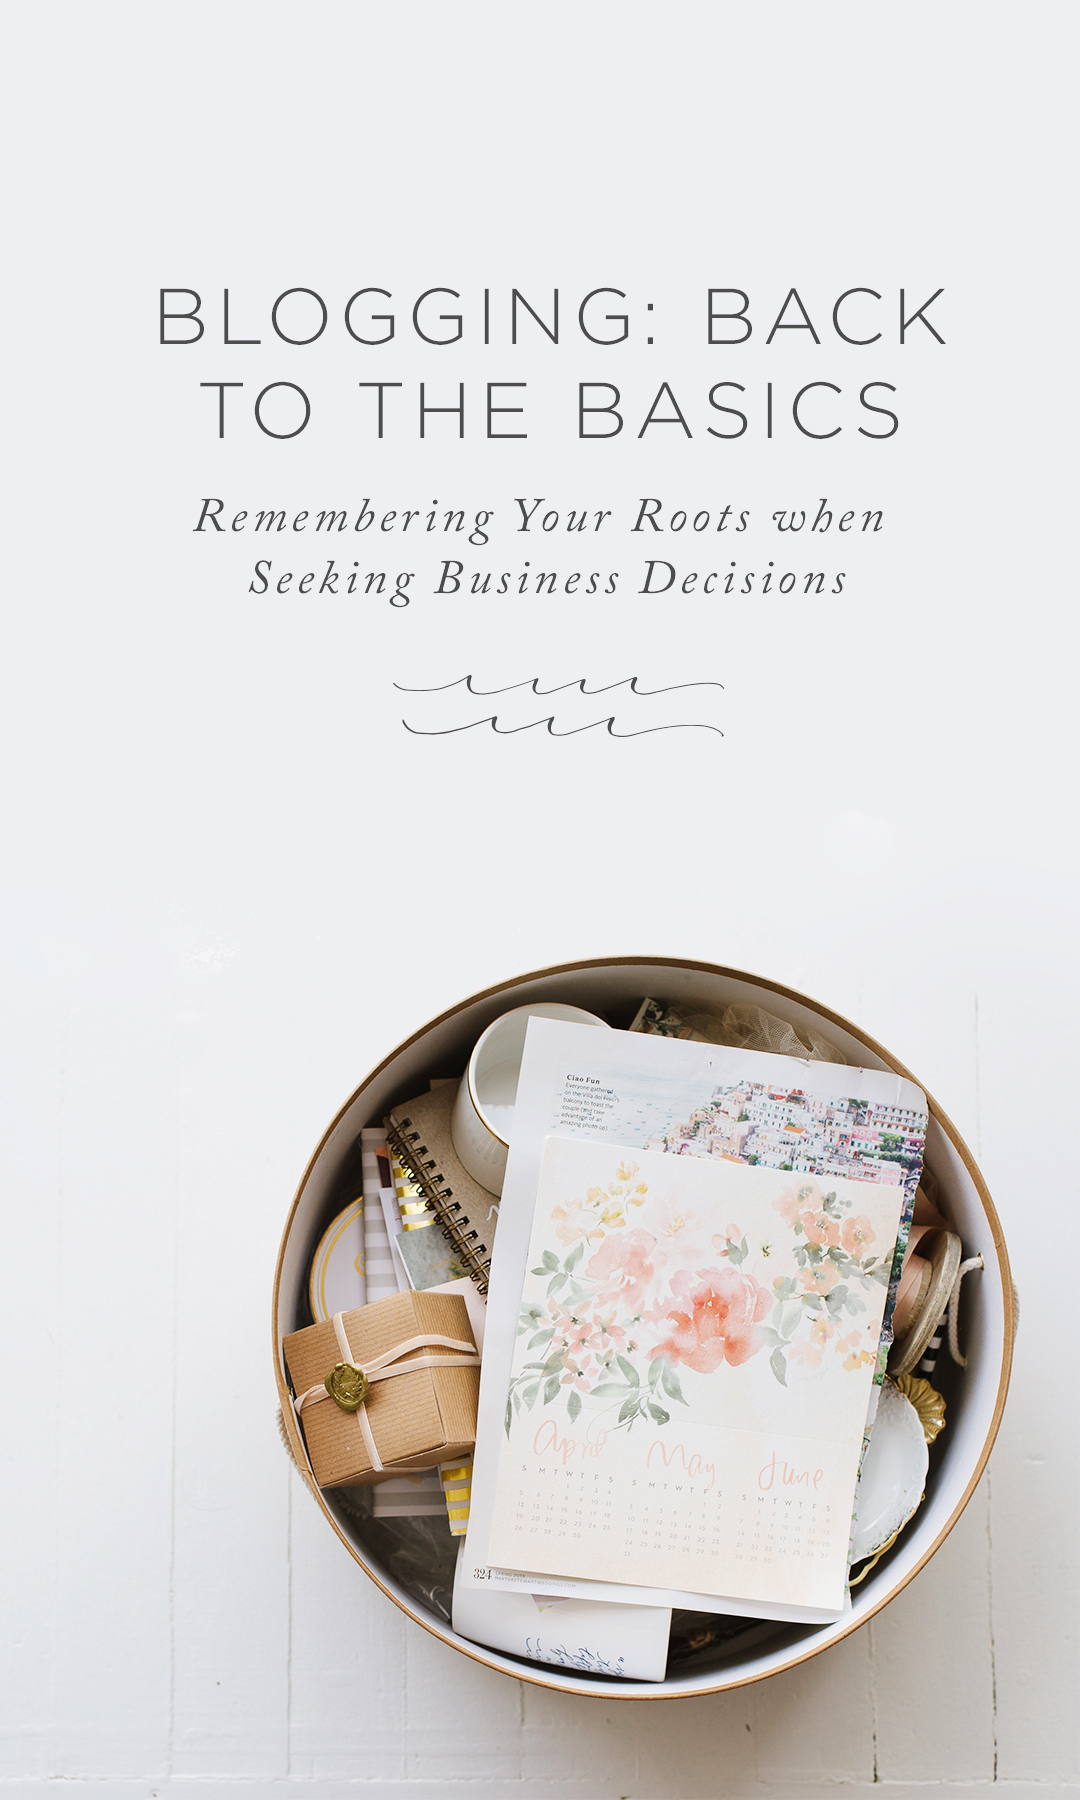  Back to the Basics: Remembering Your Roots (and your audience) when Seeking Business Decisions